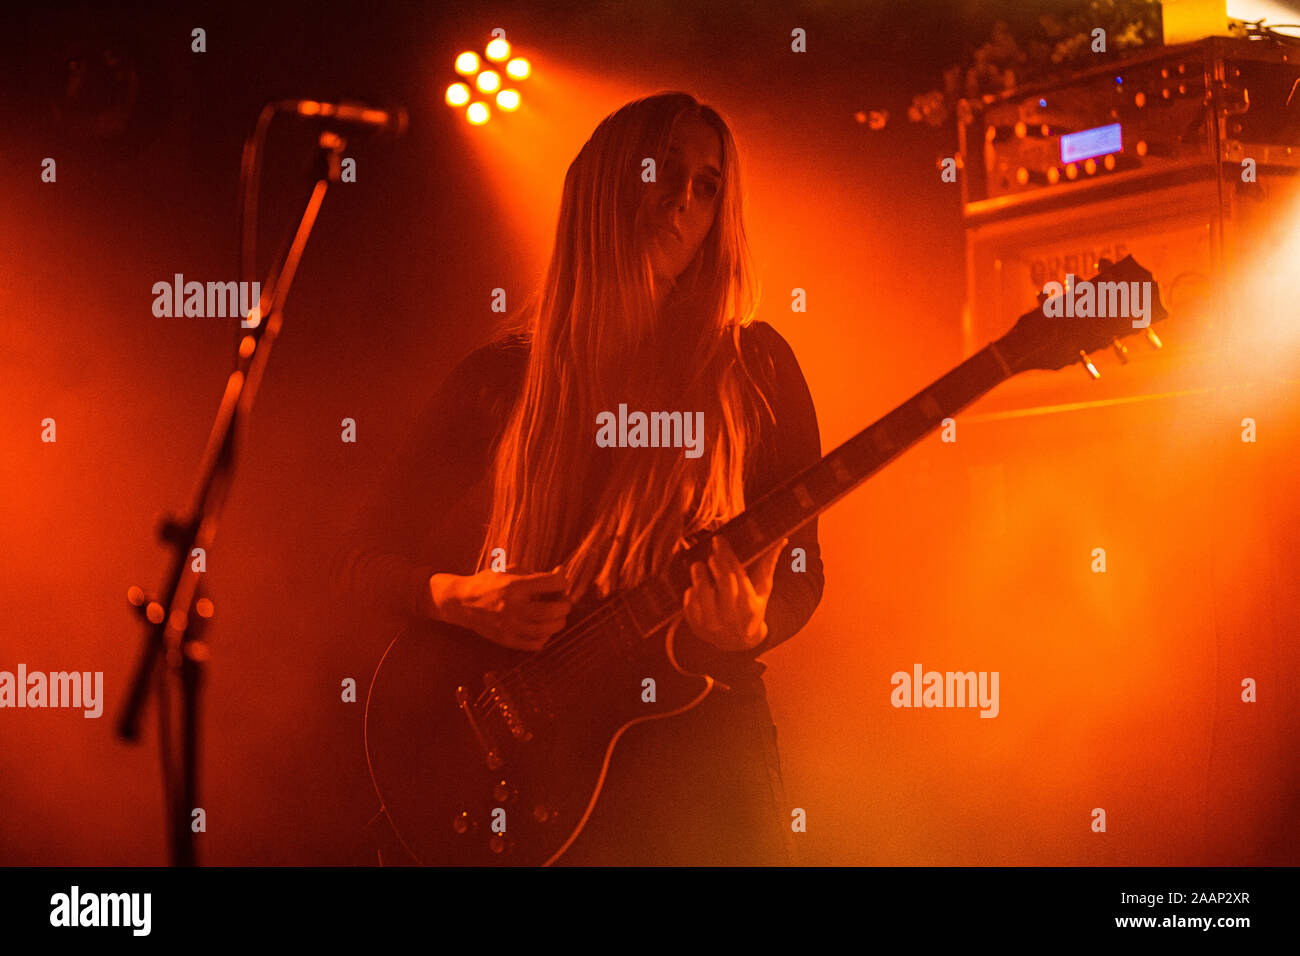 Copenhagen, Denmark. 21st, November 2019. The Swiss metal band E-L-R  performs a live concert at Stengade in Copenhagen. Here vocalist and  guitarist S.M. is seen live on stage. (Photo credit: Gonzales Photo -